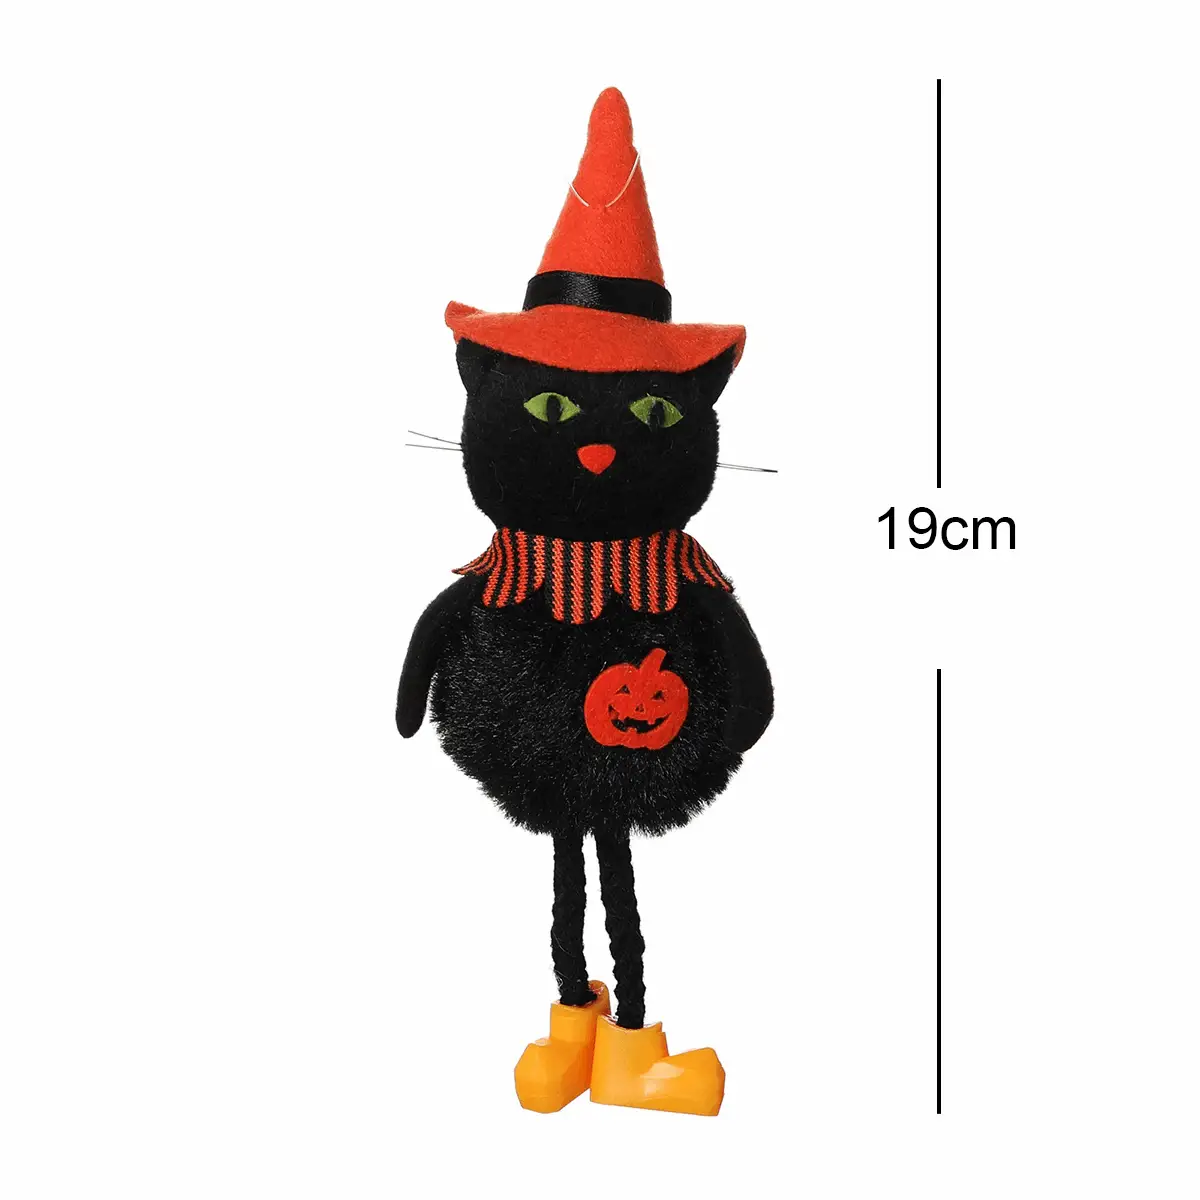 a black cat wearing a witches hat and boots